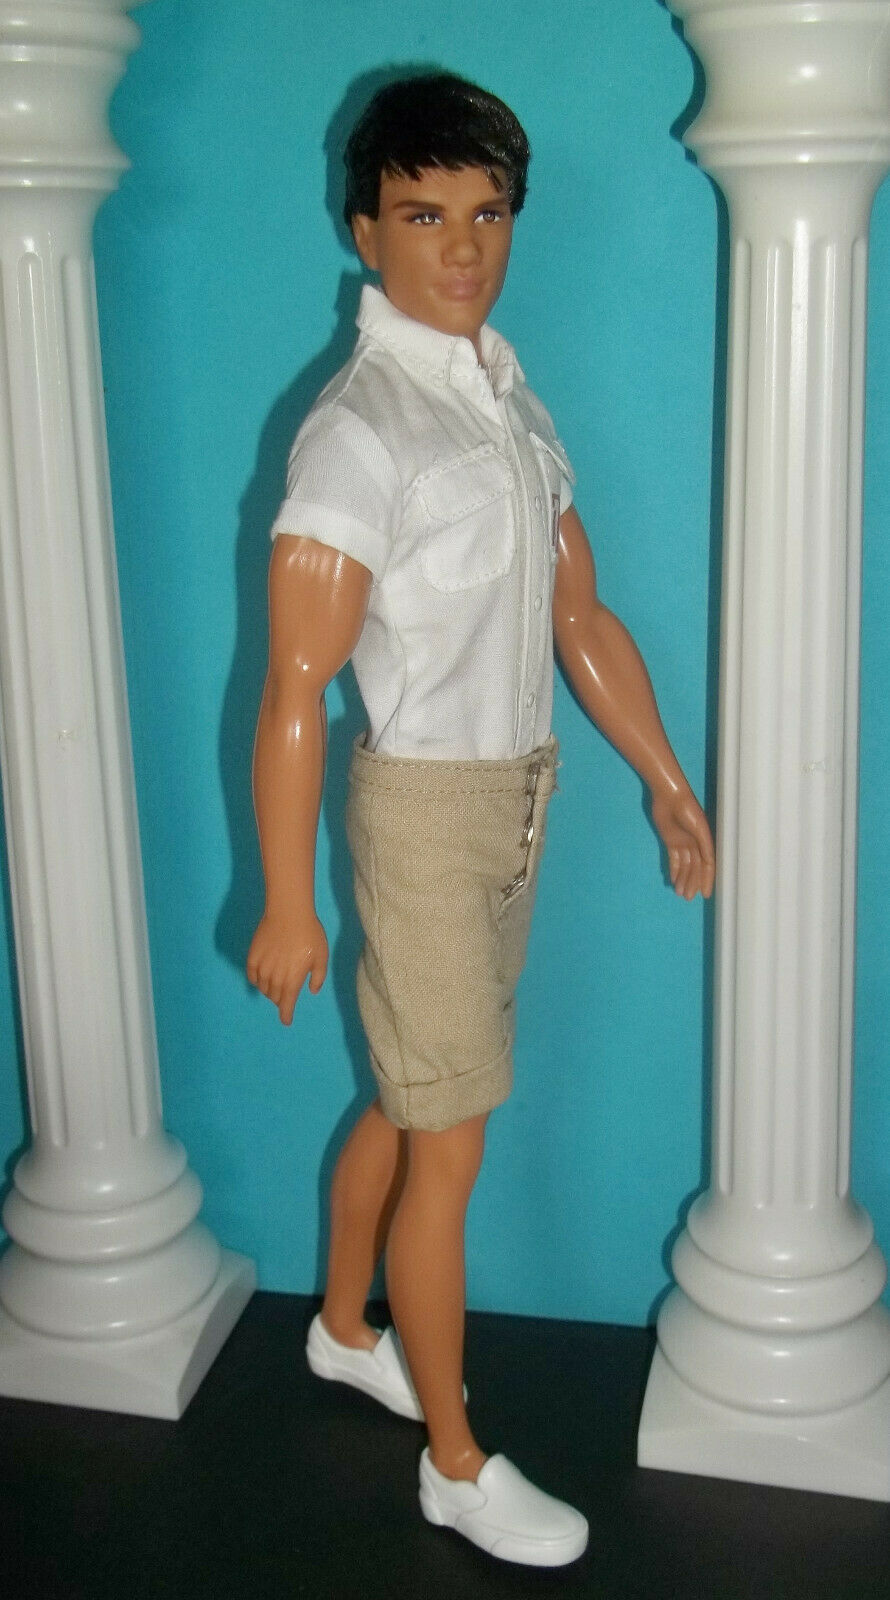 No Doll! Aggies Fan Ken Model Muse Articulated Outfit Shirt Htf Shorts Shoes!!